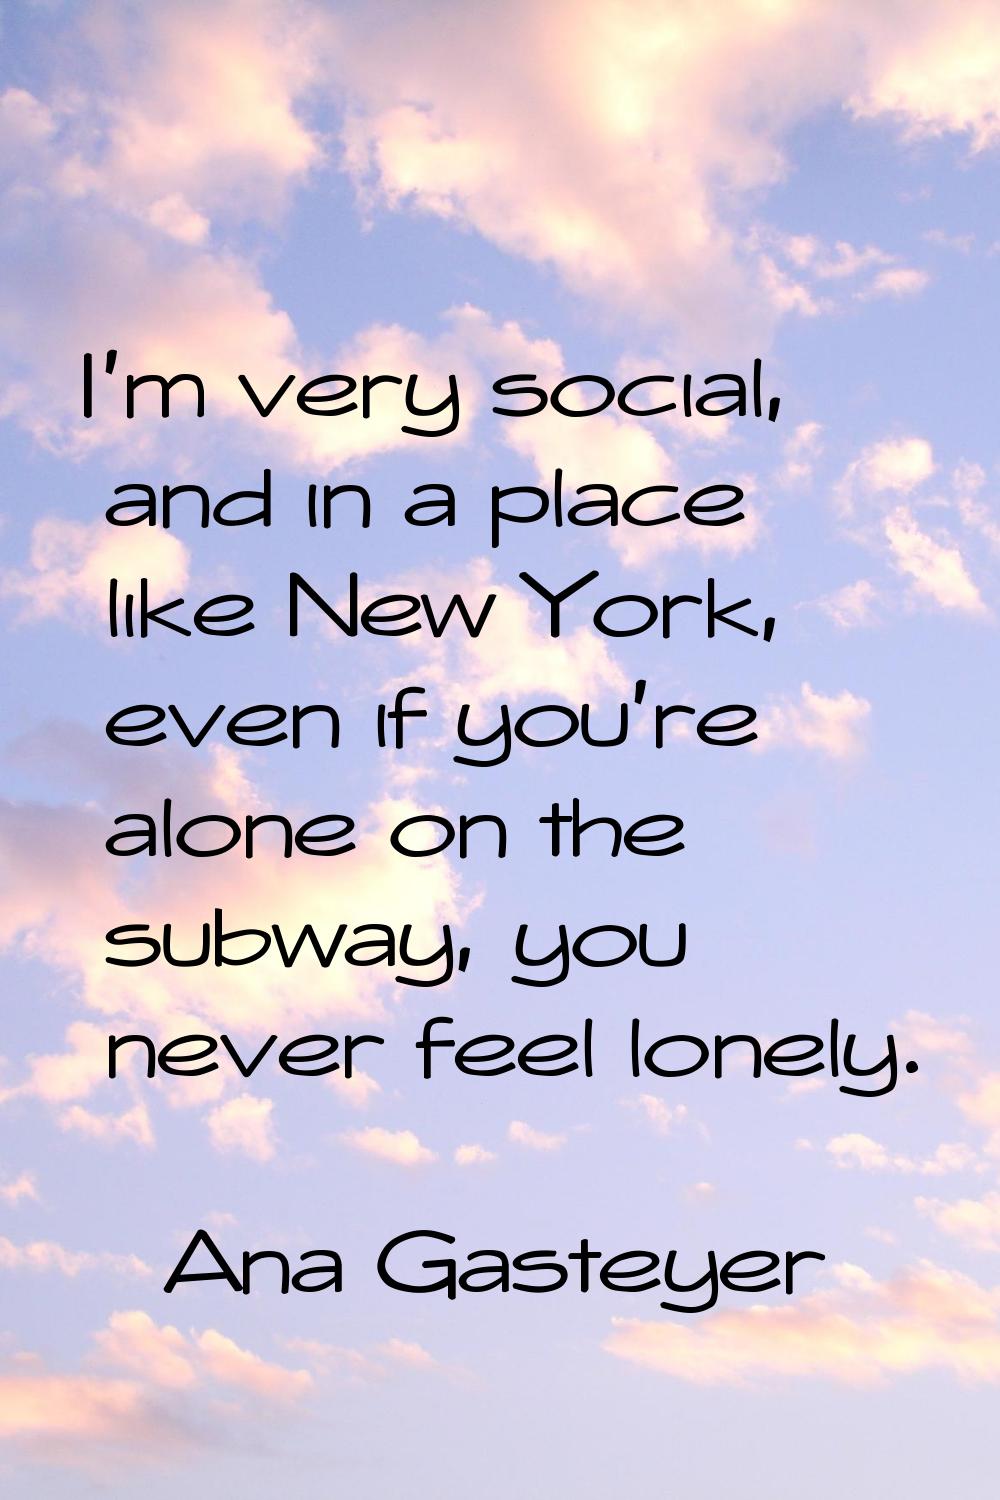 I'm very social, and in a place like New York, even if you're alone on the subway, you never feel l